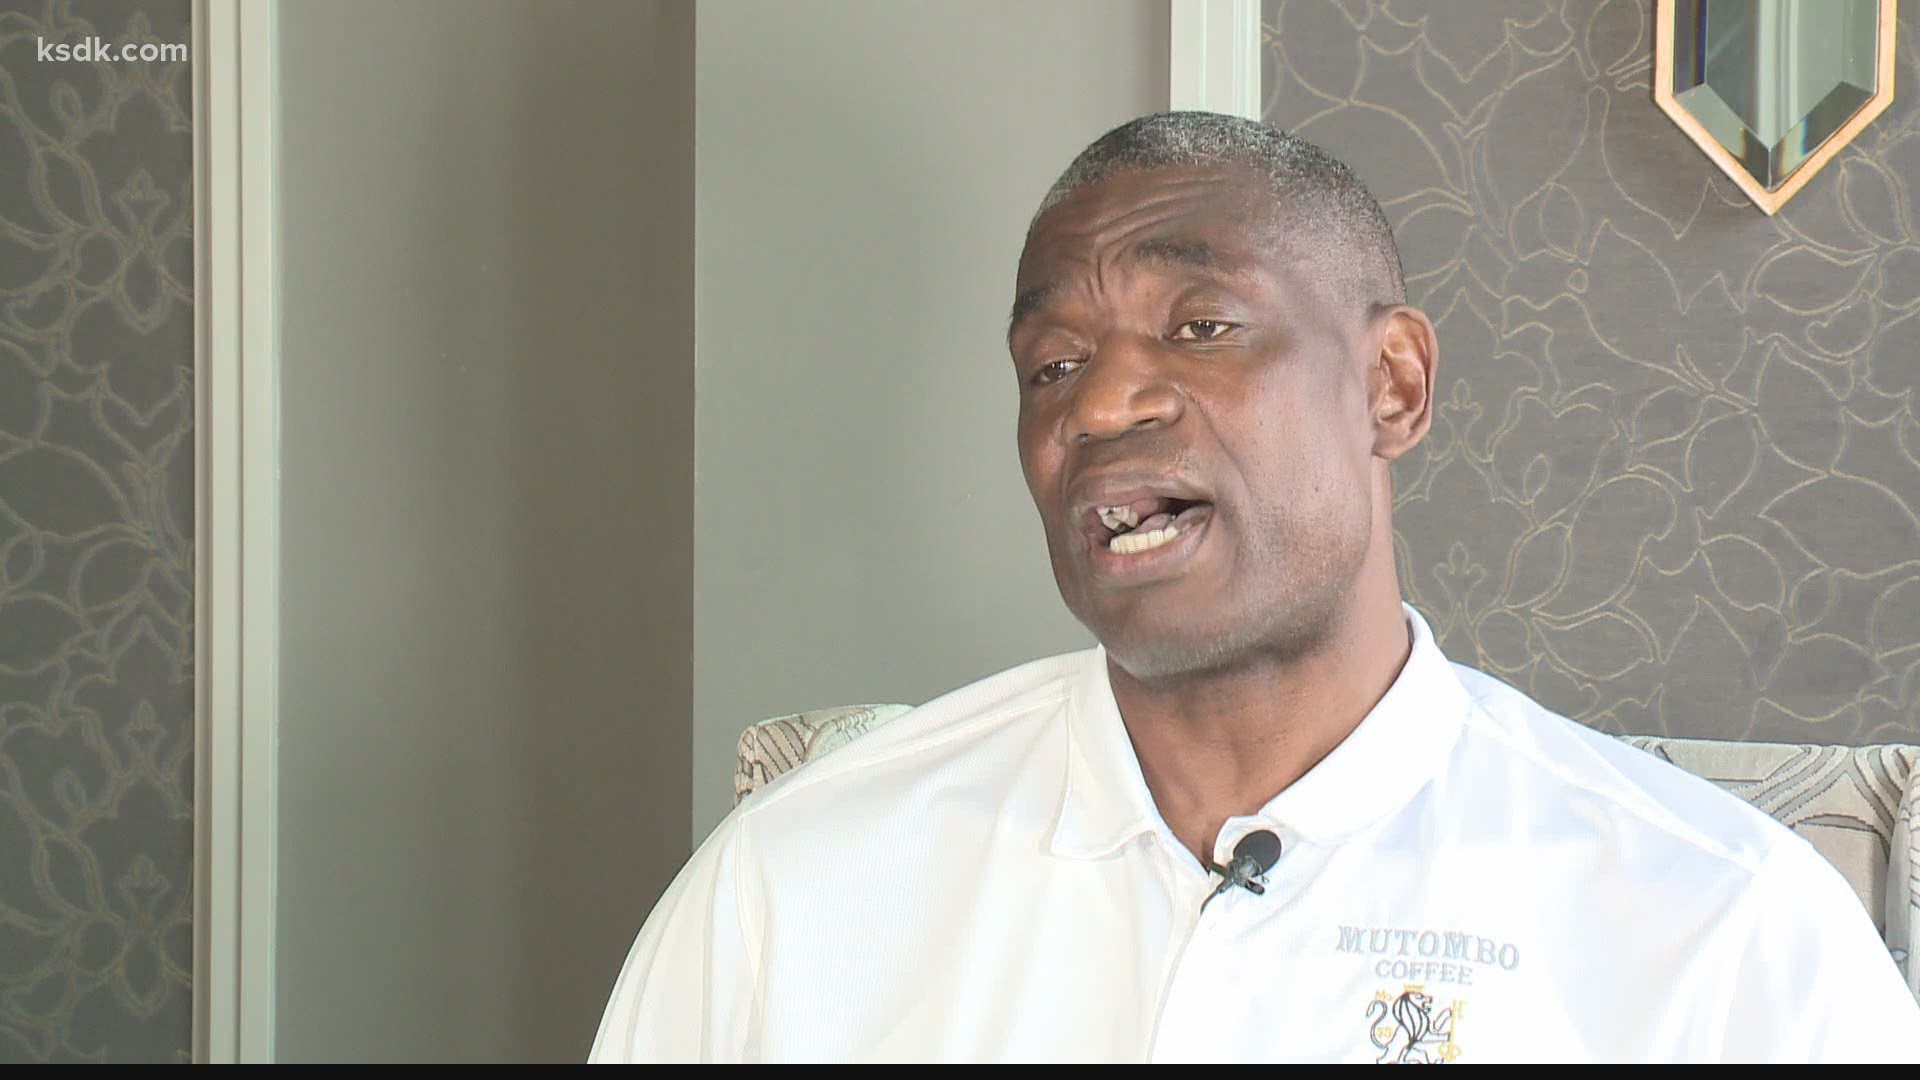 Dikembe Mutombo is using some of the proceeds 
of his coffee company to help the areas where the coffee comes from.